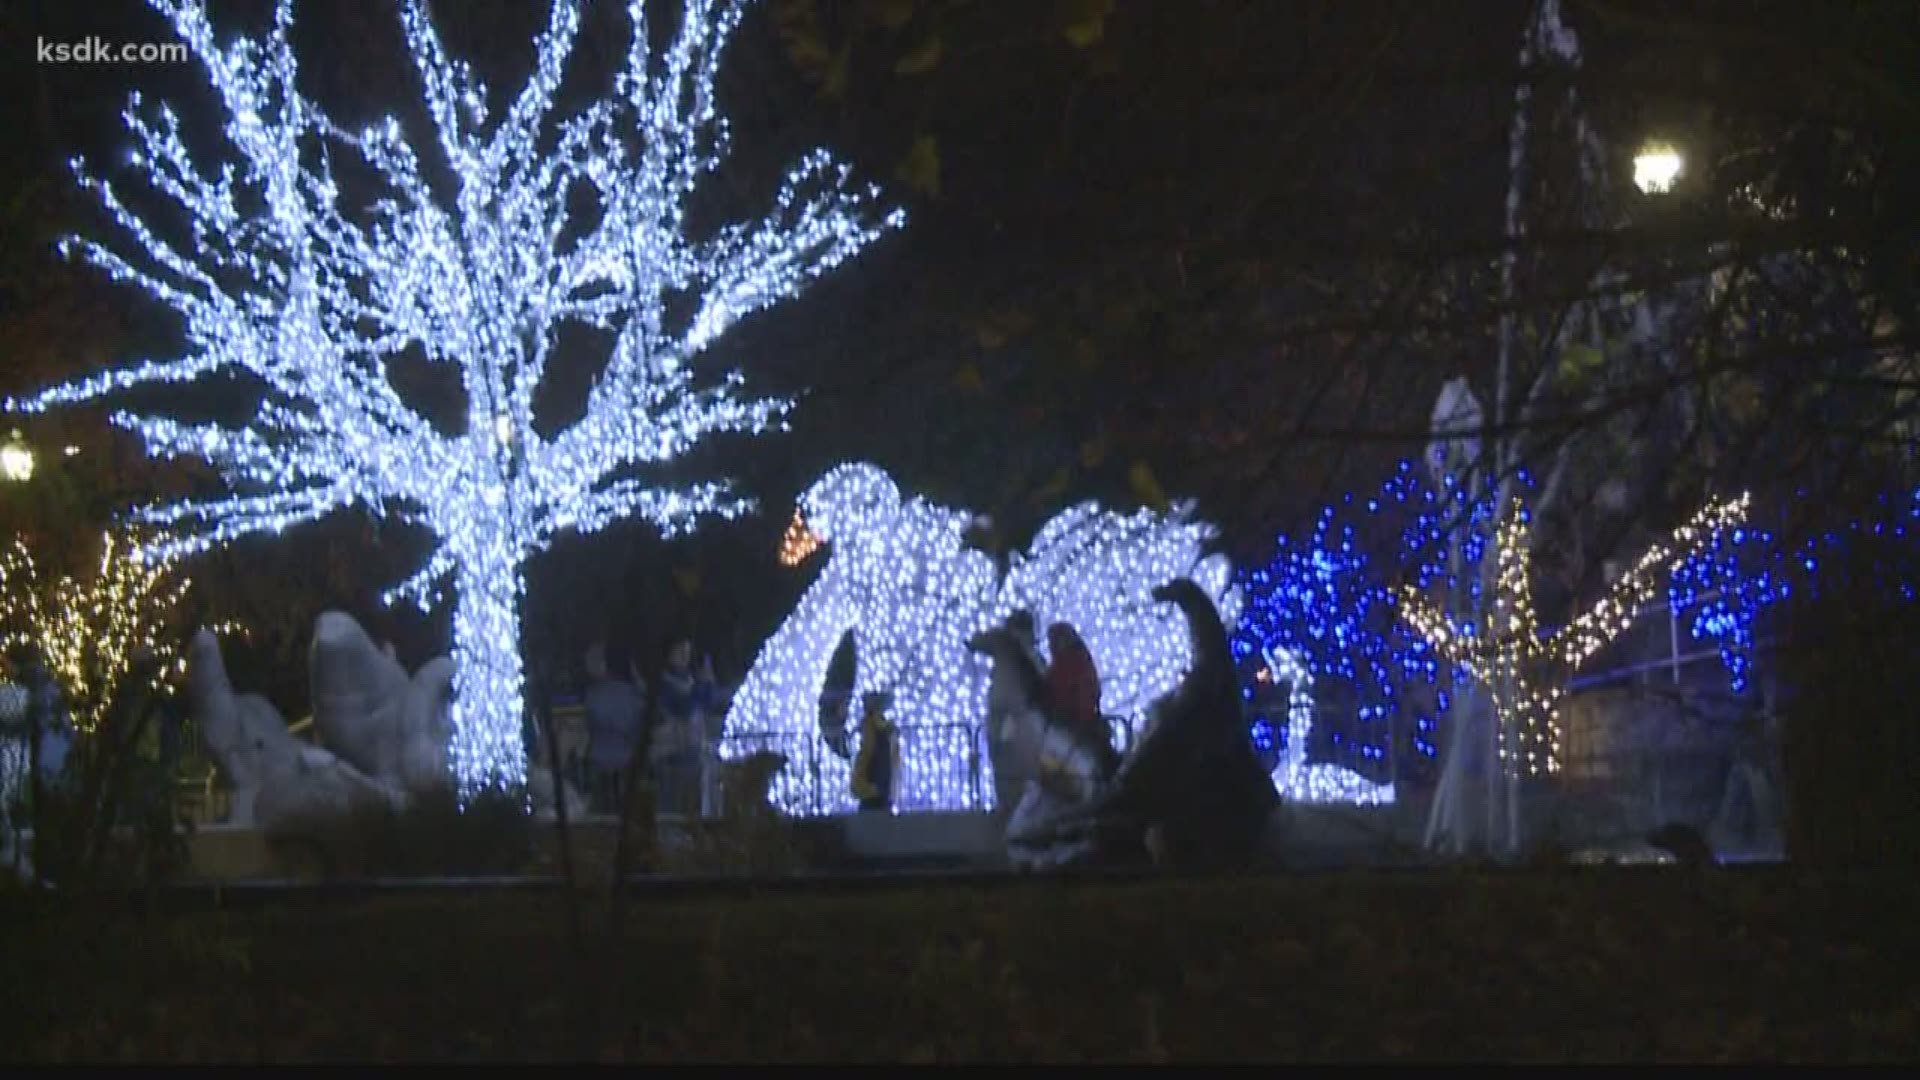 stl events | Wild Lights returns to the Saint Louis Zoo | 0